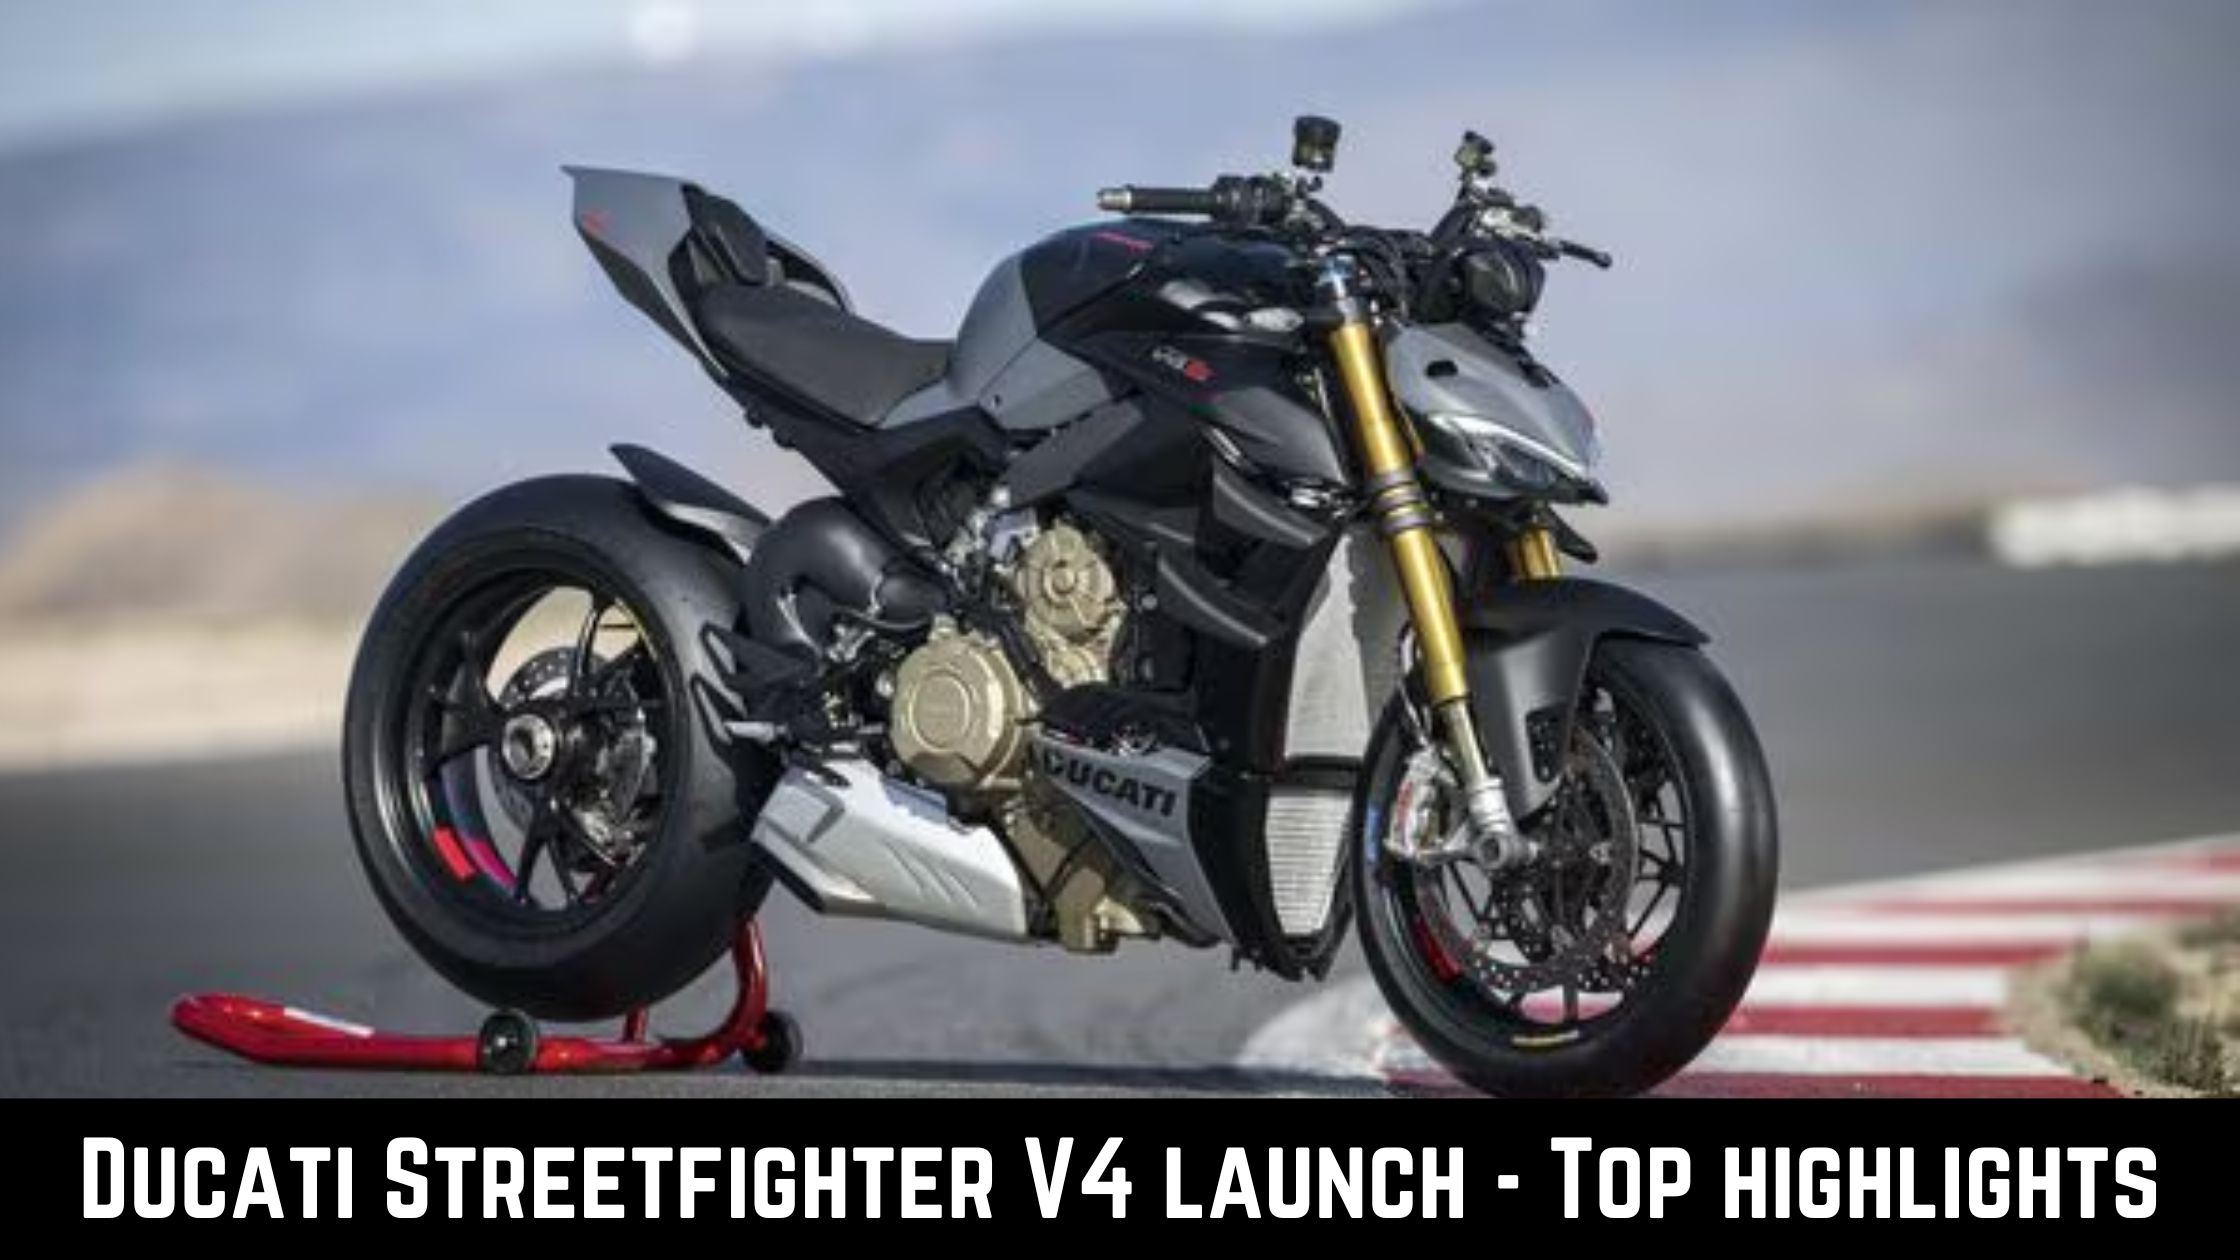 Ducati Streetfighter V4 launch- Top 5 highlights